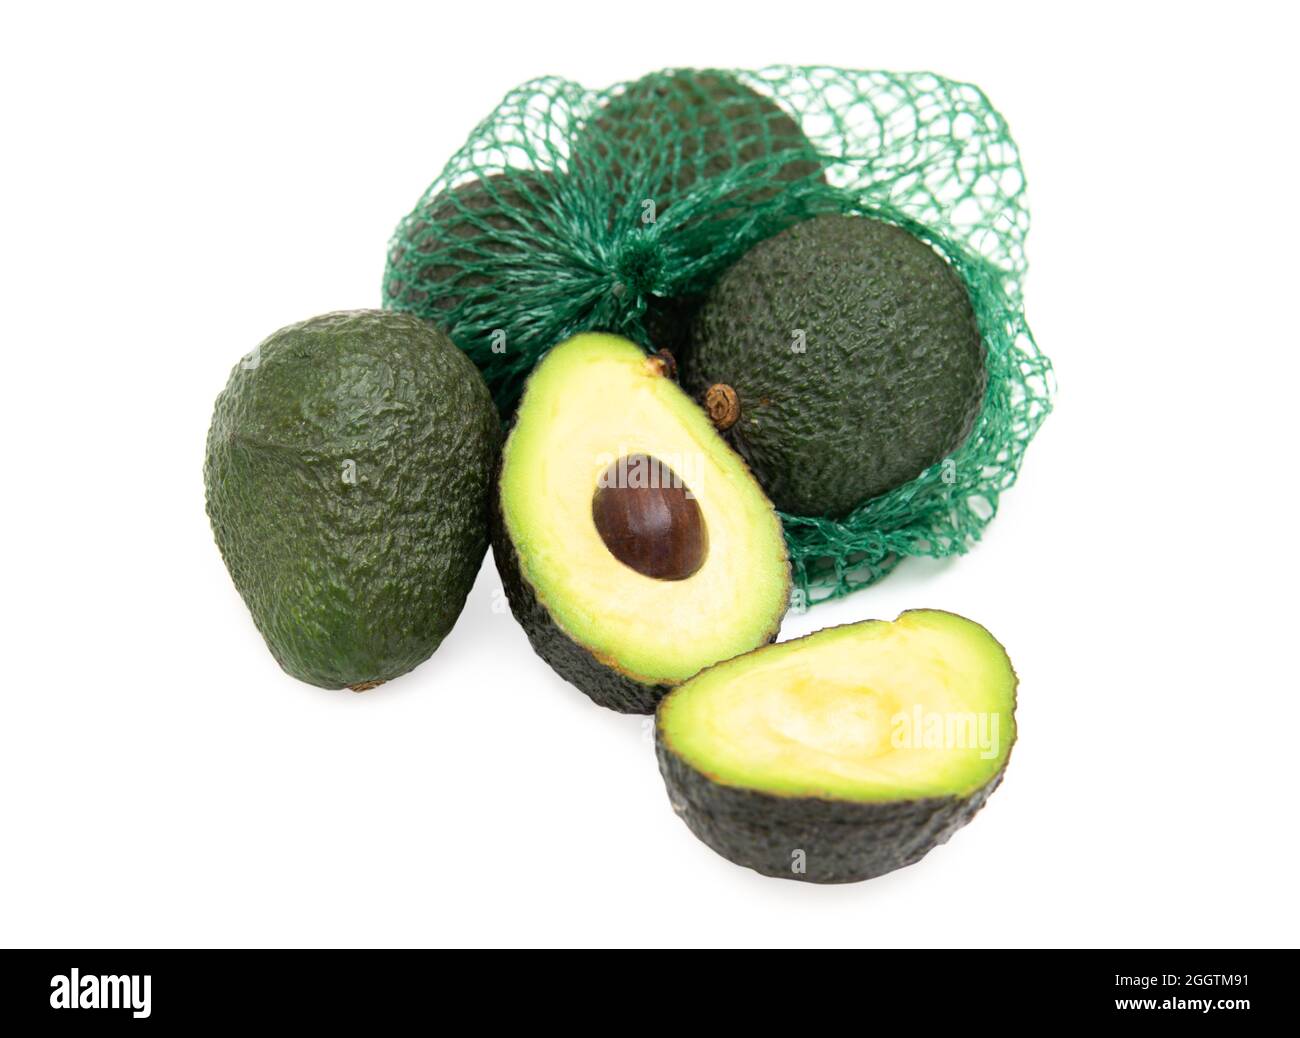 https://c8.alamy.com/comp/2GGTM91/group-of-fresh-avocados-in-a-green-mesh-bag-isolated-on-white-one-avocado-fruit-is-cut-open-2GGTM91.jpg